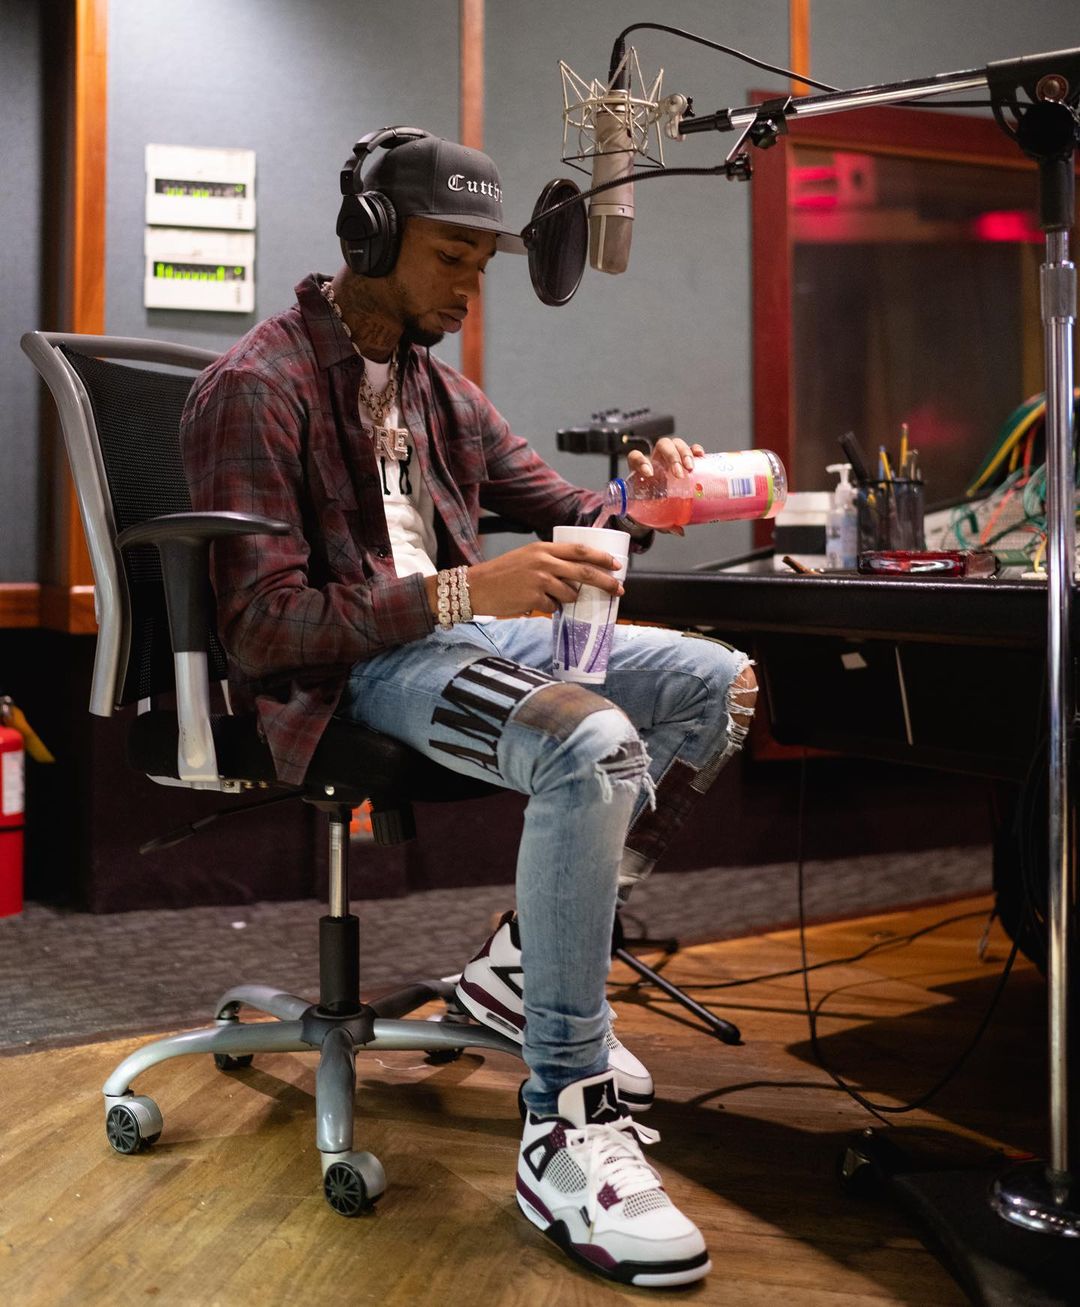 Key Glock Hits The Studio In An Amiri Flannel, Tee, & Jeans With PSG x Jordans